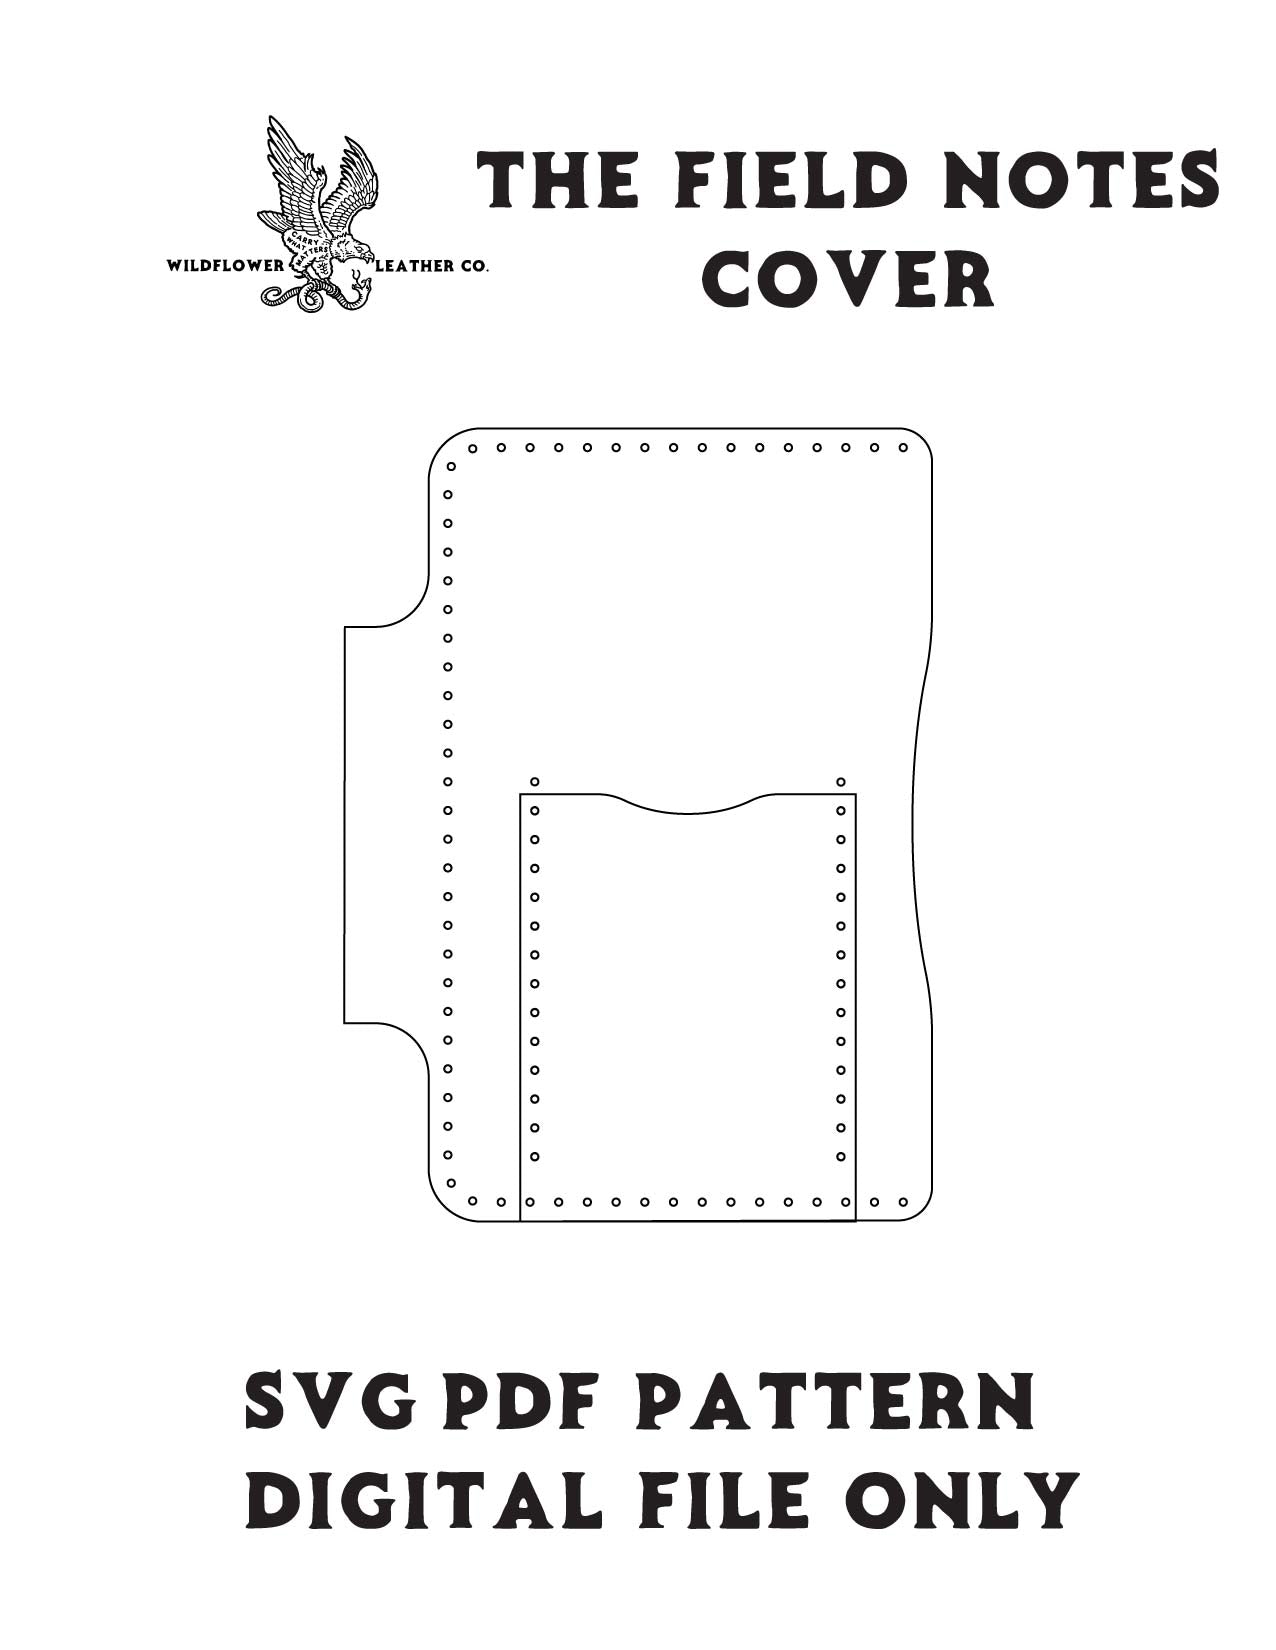 $1 Pattern - The Field Notes Cover